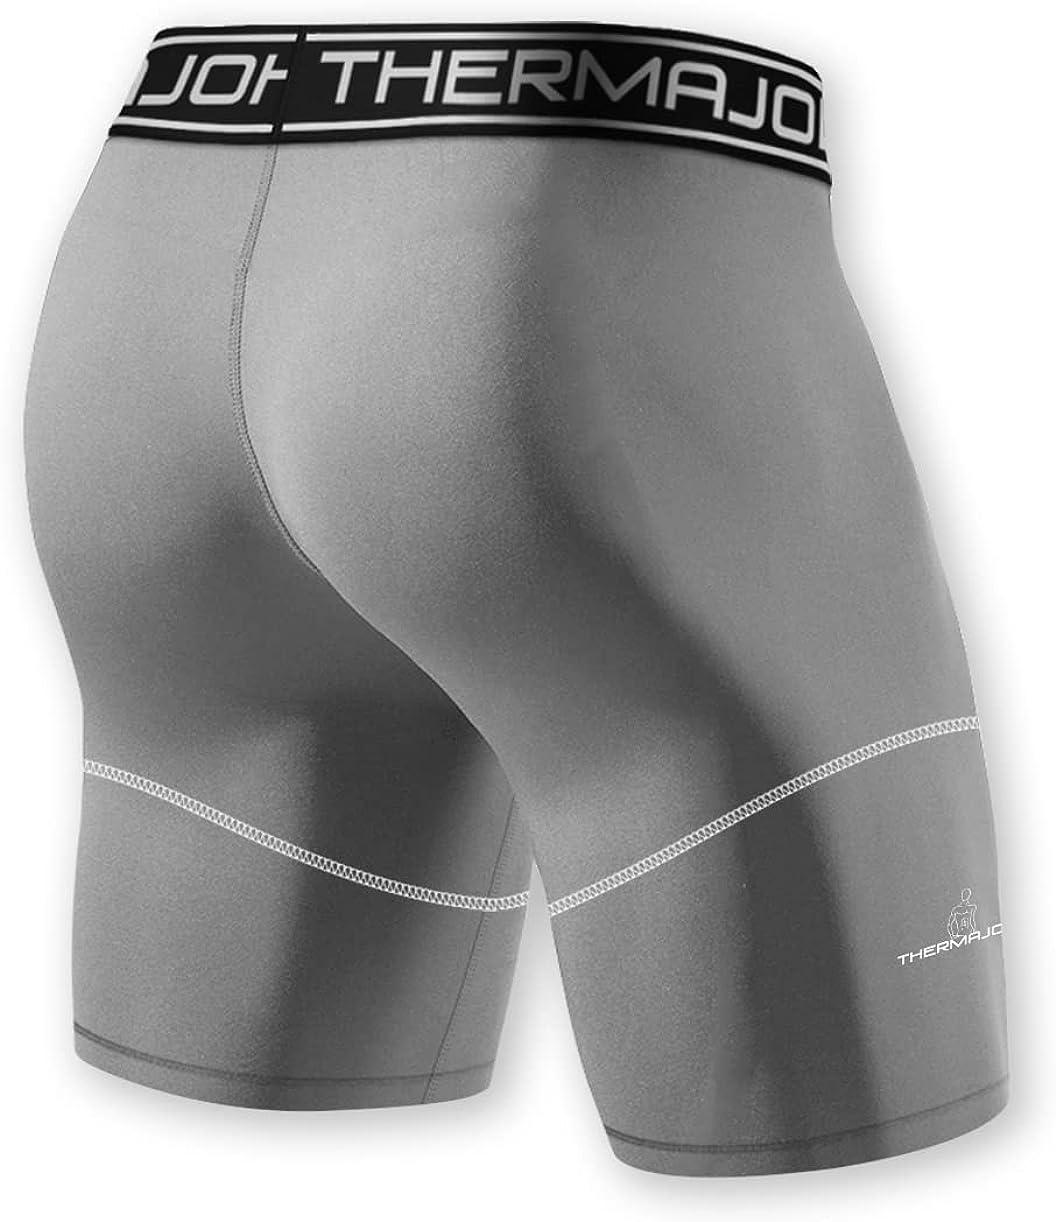 Will Compression Shorts Help Chafing?– Thermajohn